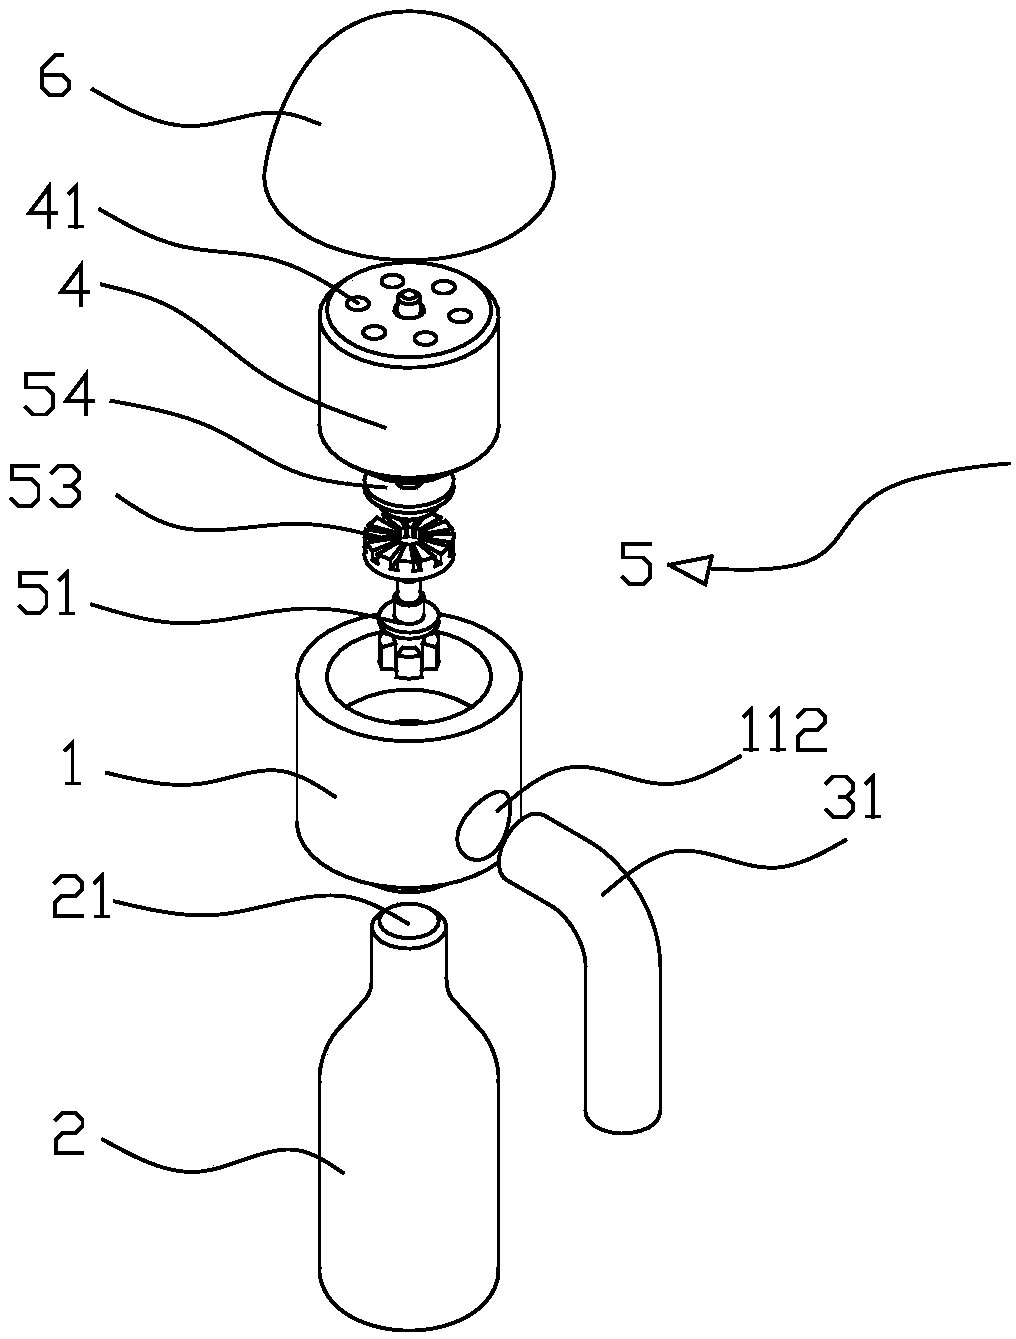 Device capable of achieving automatic inflation when wet and unmanned aerial vehicle